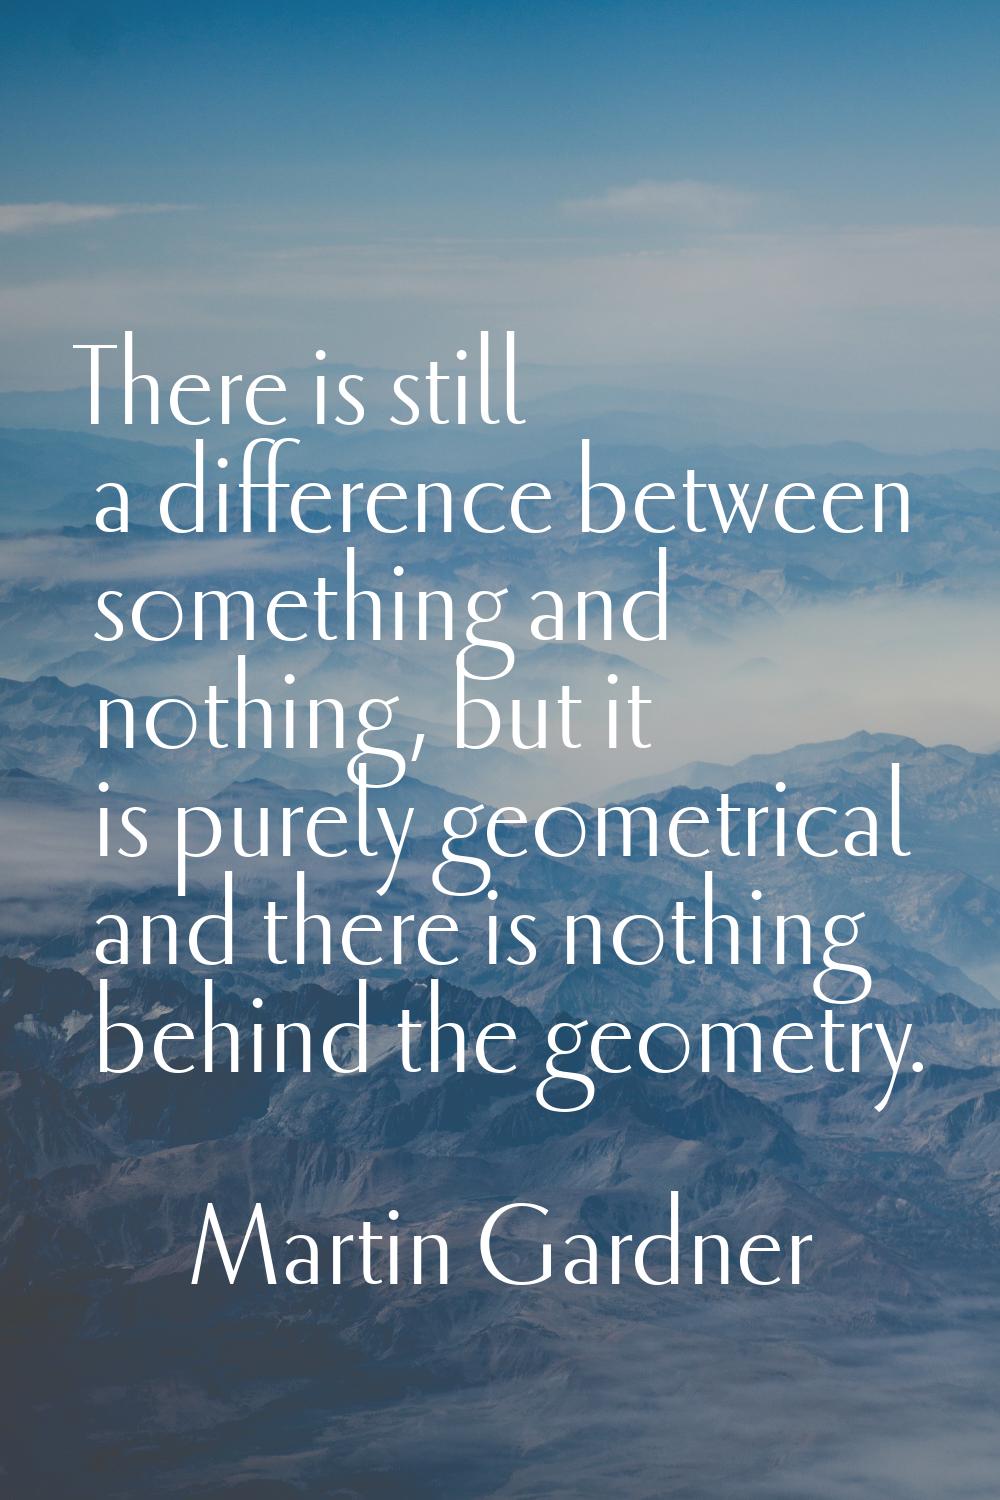 There is still a difference between something and nothing, but it is purely geometrical and there i